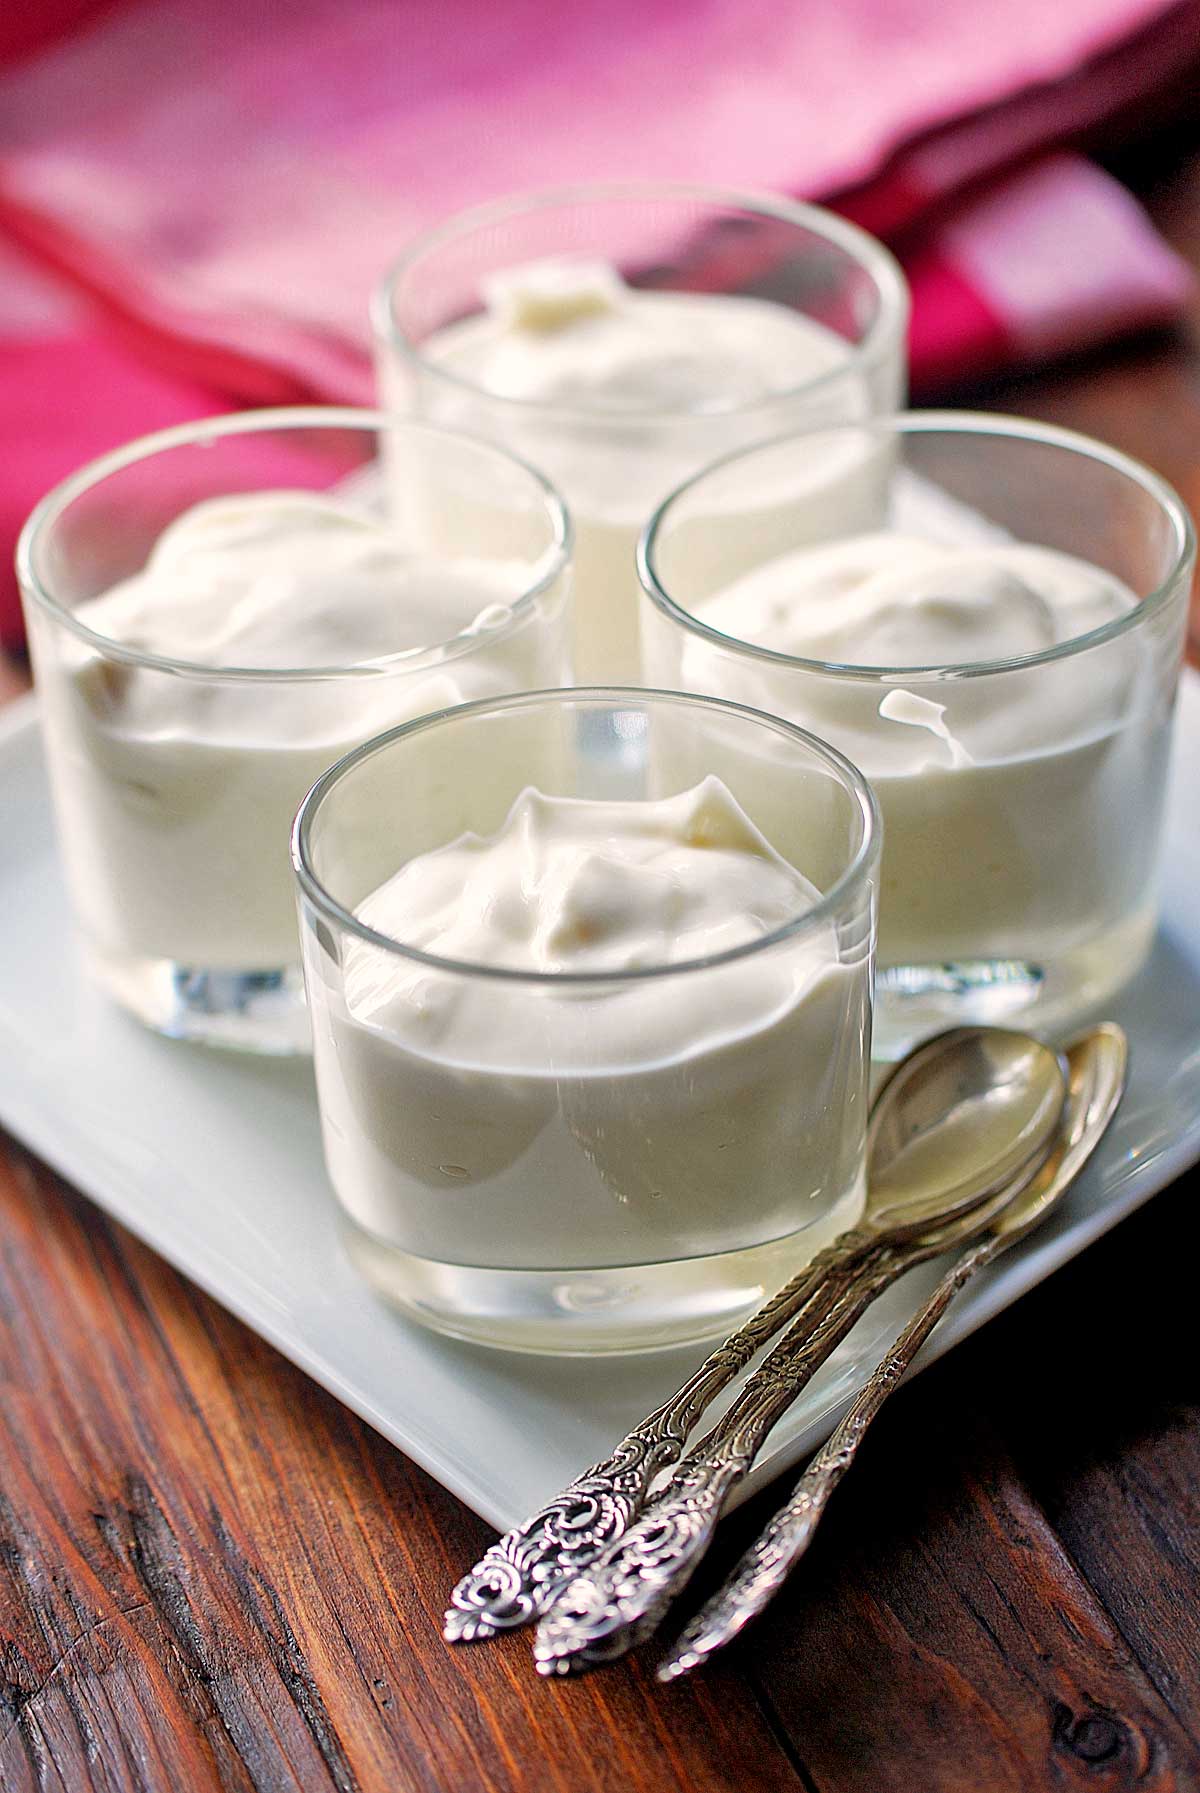 Ricotta desserts are served in small cups with spoons.